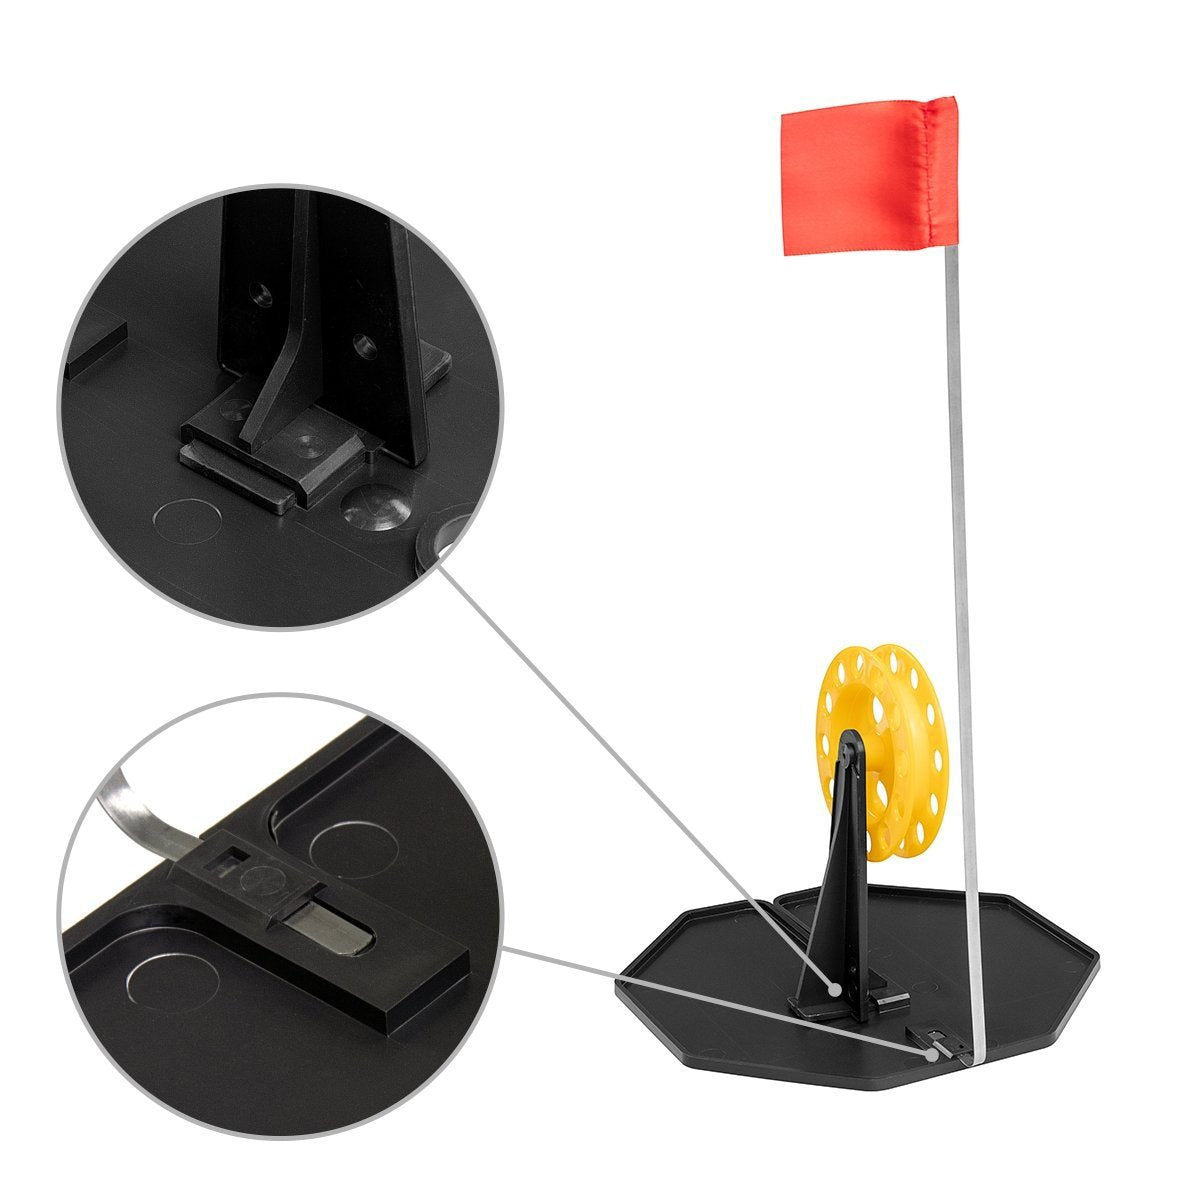 The flag shaft is reliably fixed at the base of Tip-up Pop-Up Integrated Hole-Cover Easy to Clip